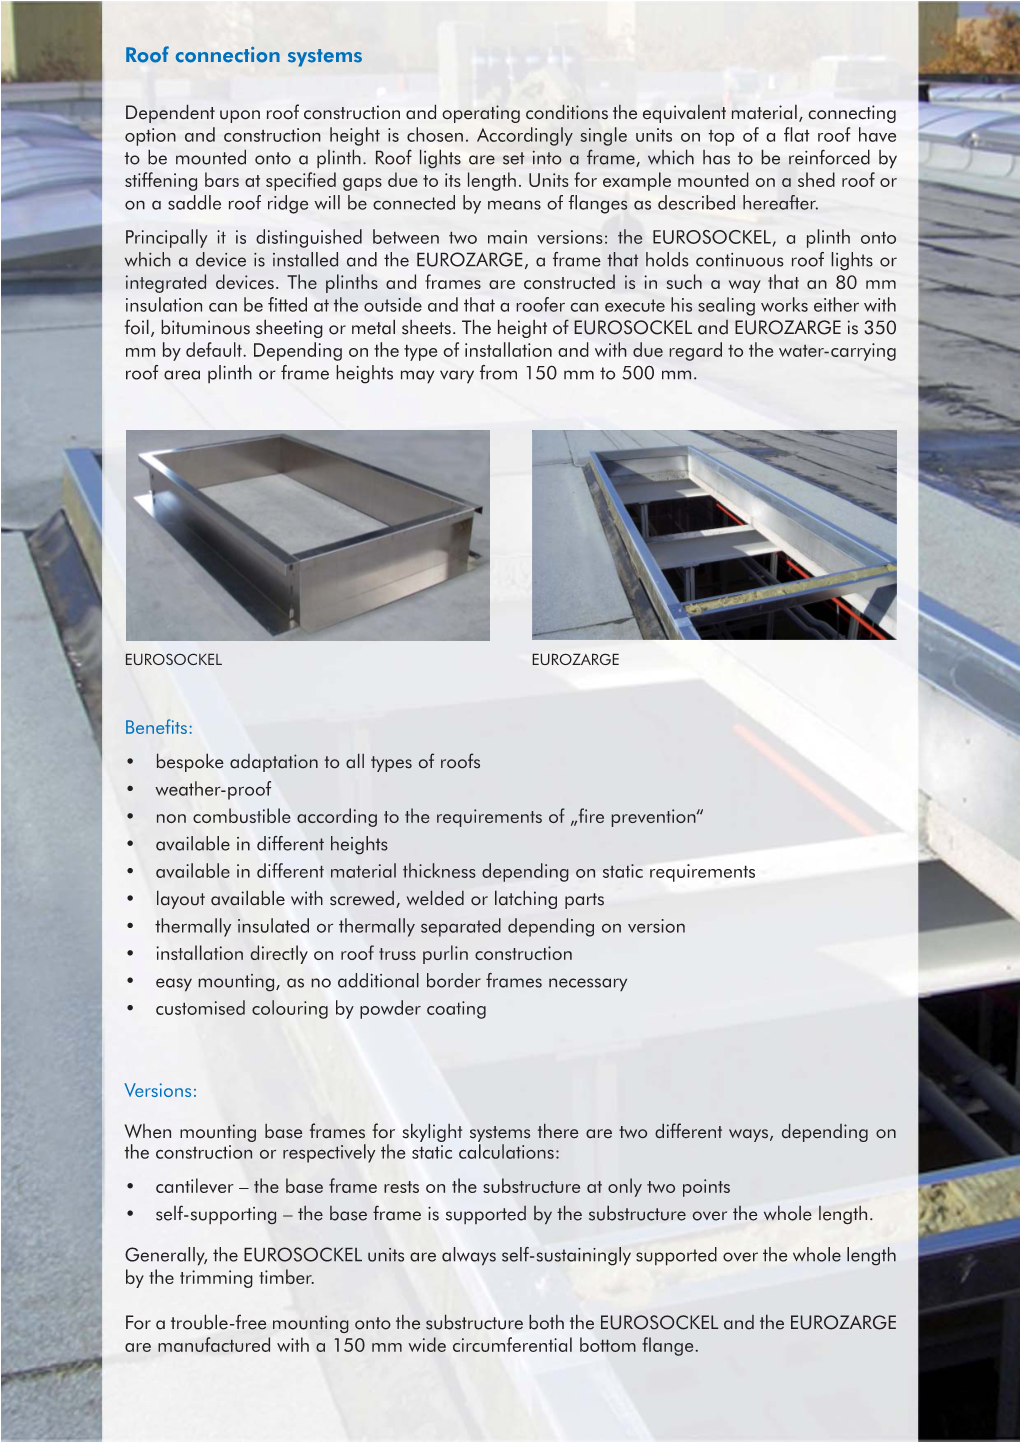 Roof Connection Systems.Indd